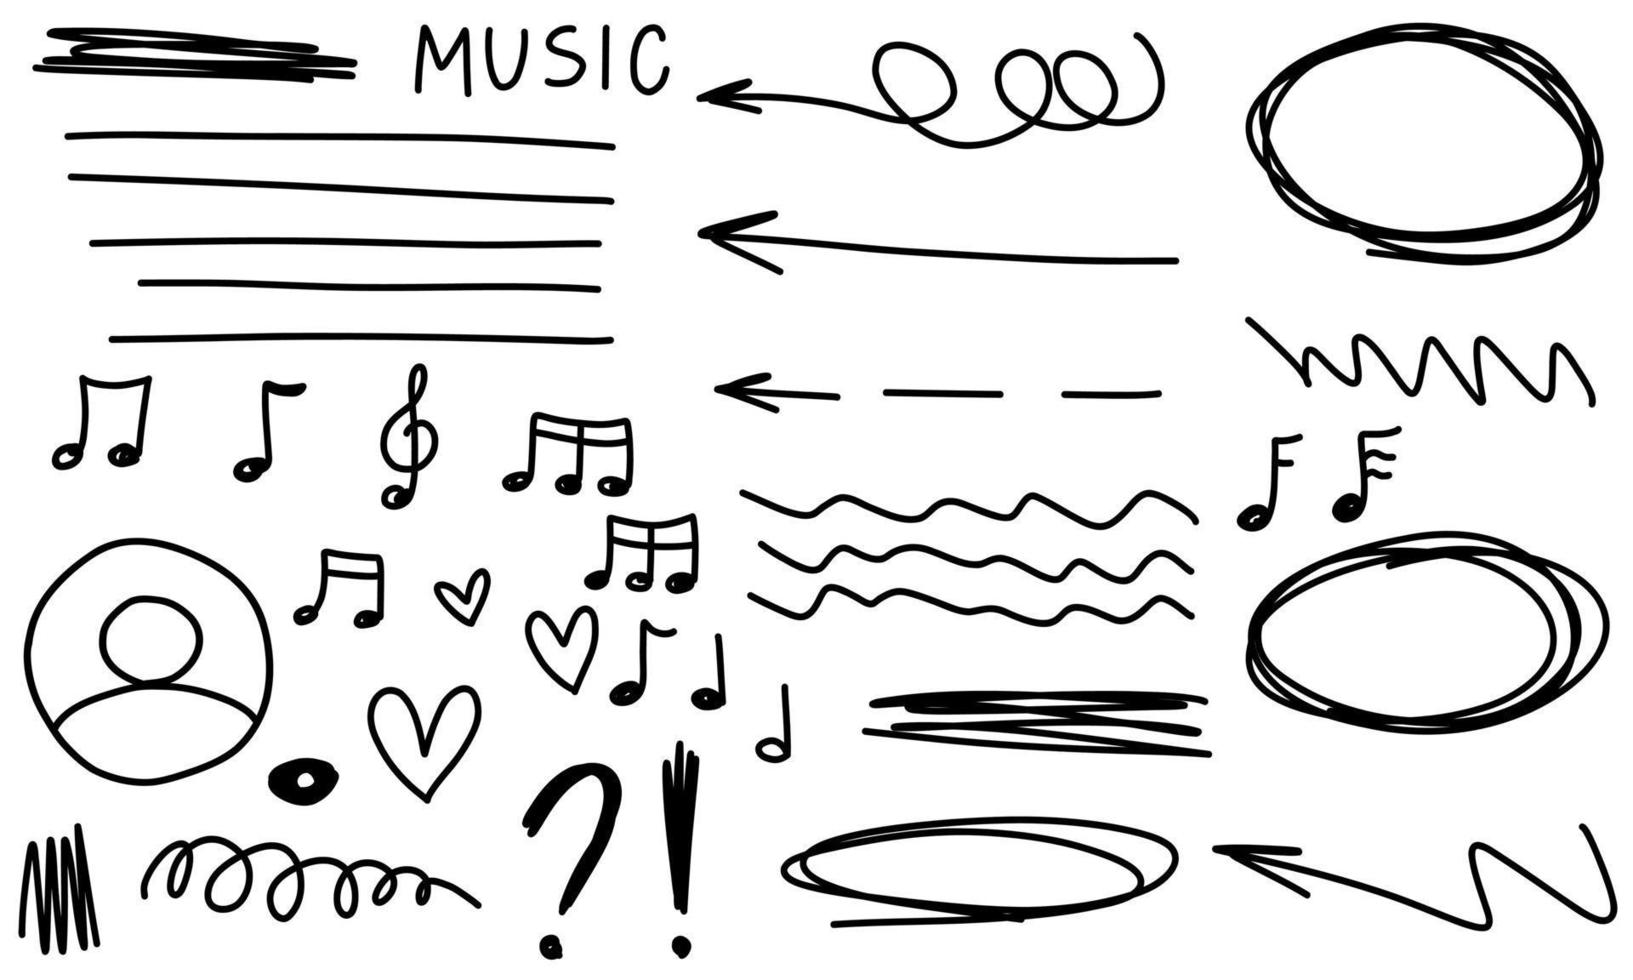 Doodle frames arrows music stars hearts notes text. Sketch set cute isolated line collection for school. vector